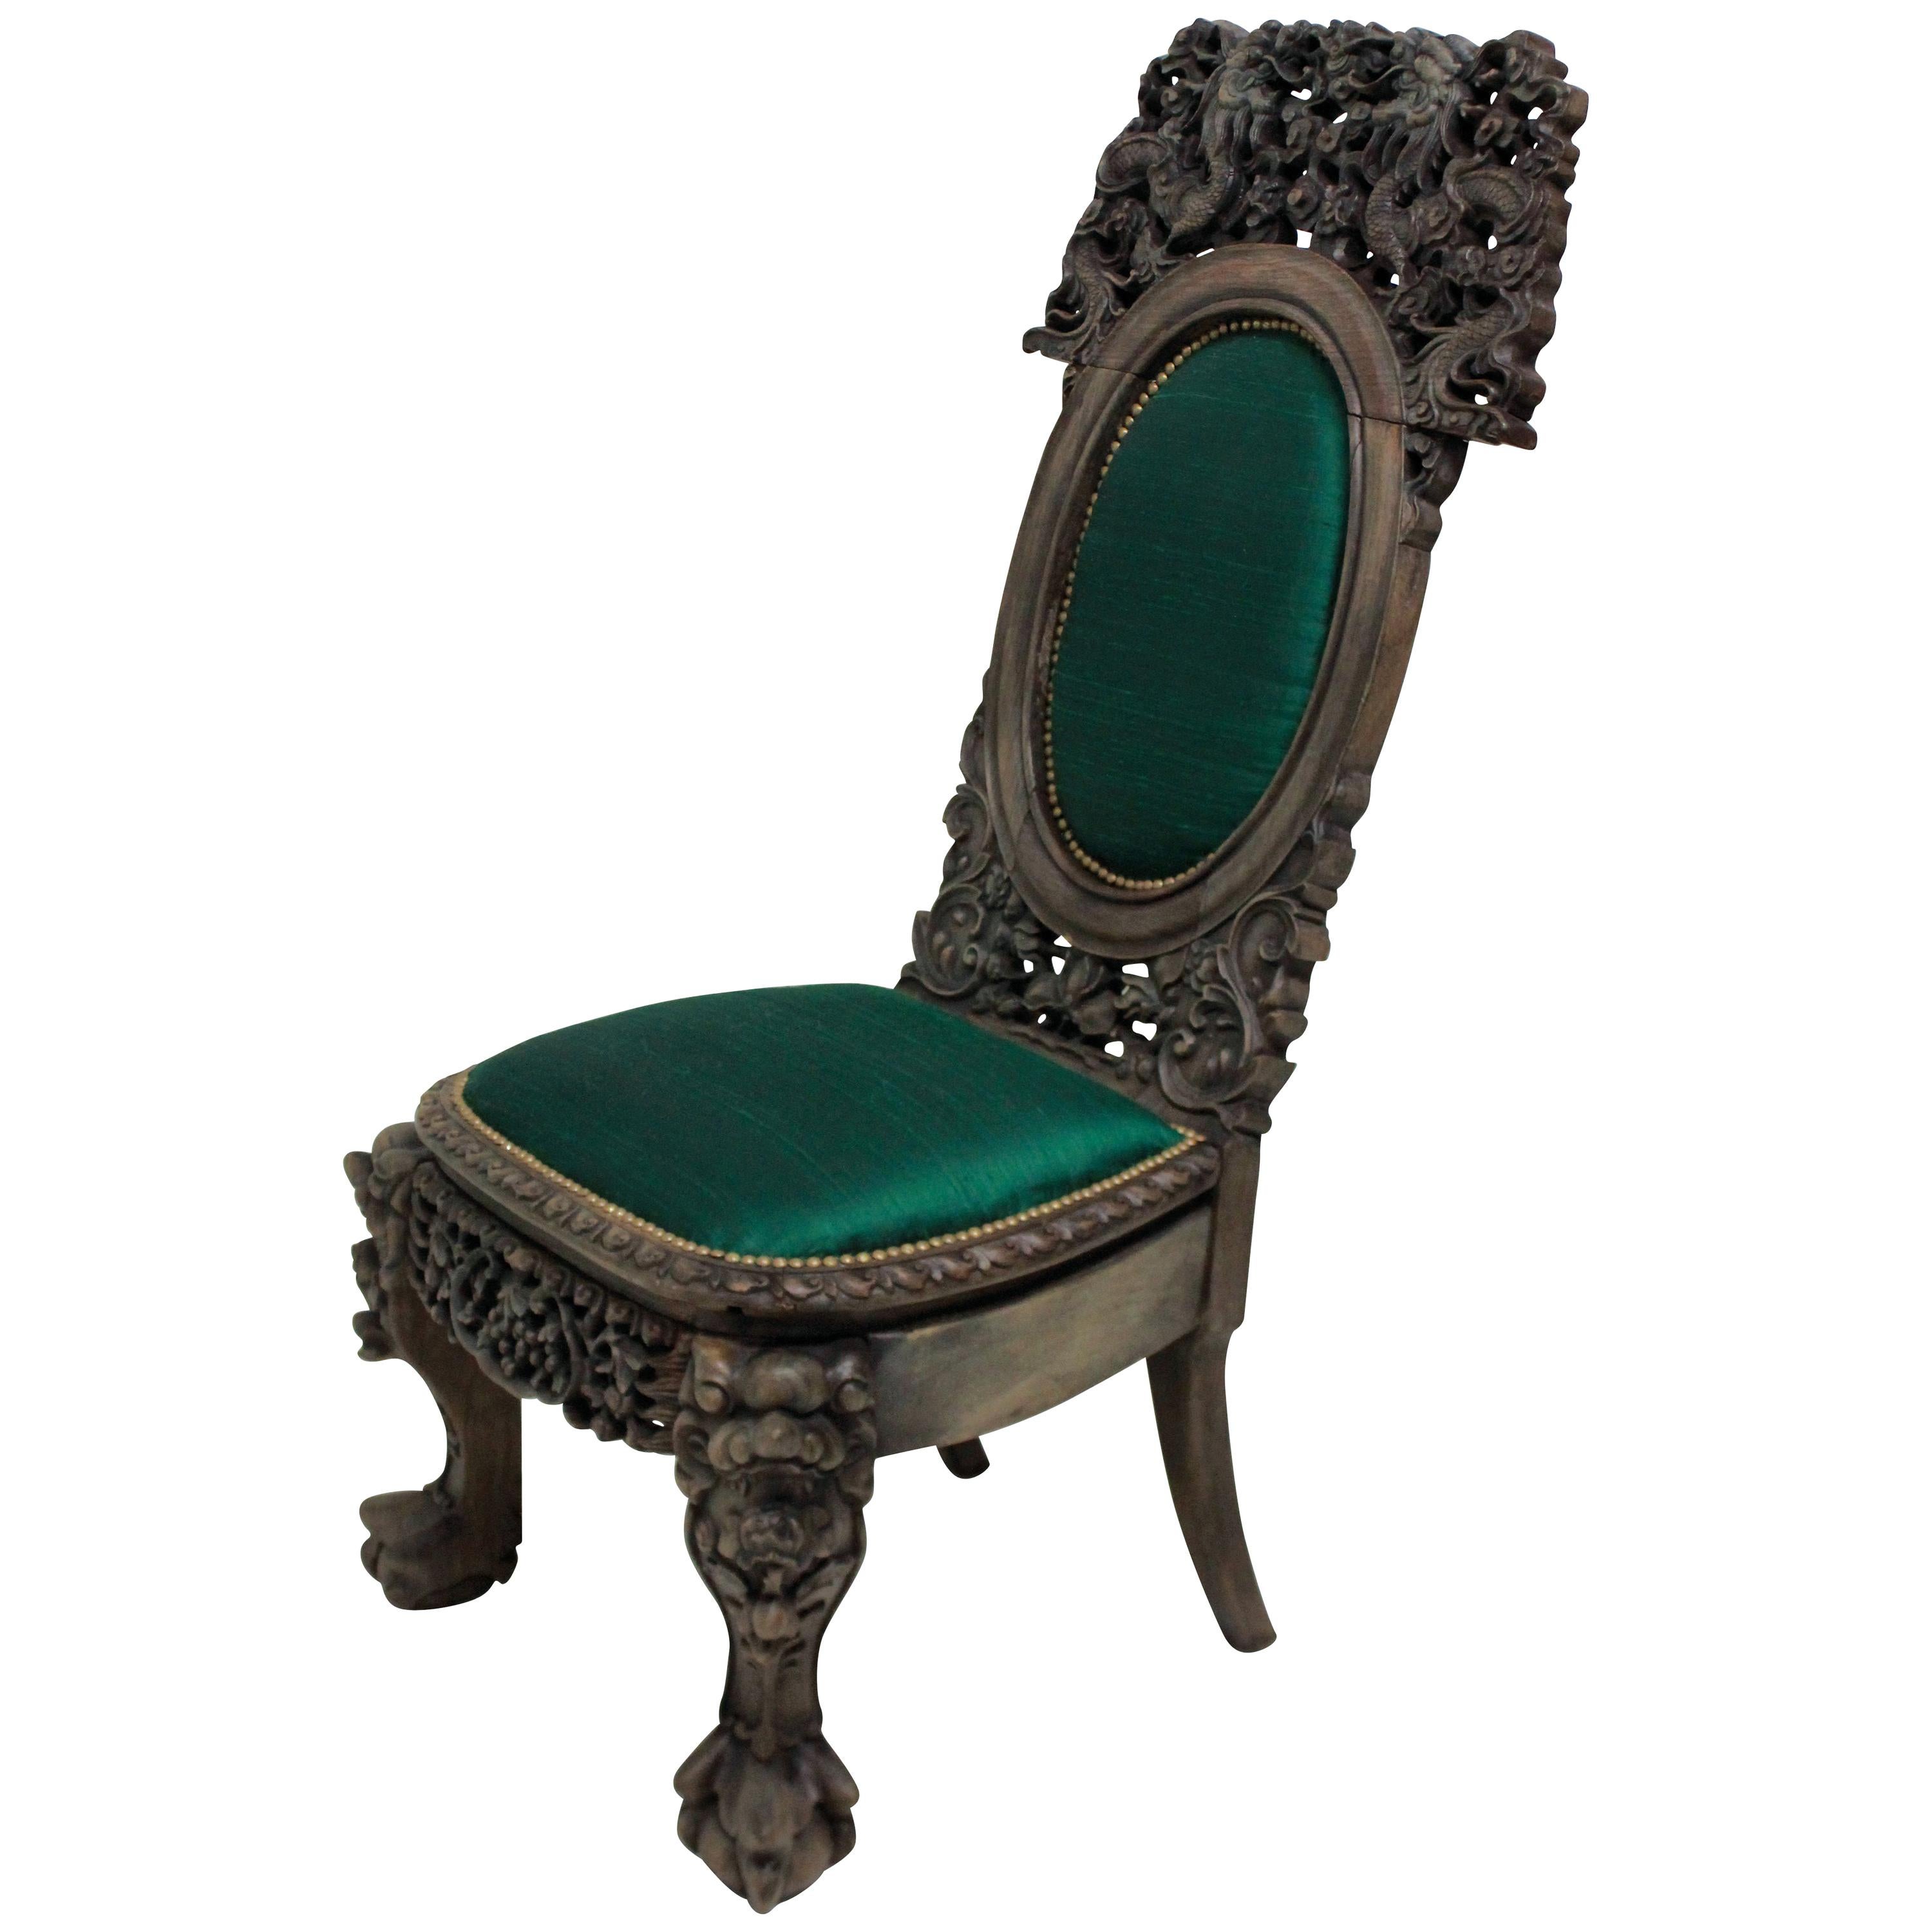 A beautifully carved 19th century Chinese bleached hardwood chair. Depicting beasts and dragons among foliage, upholstered in emerald green silk.

  